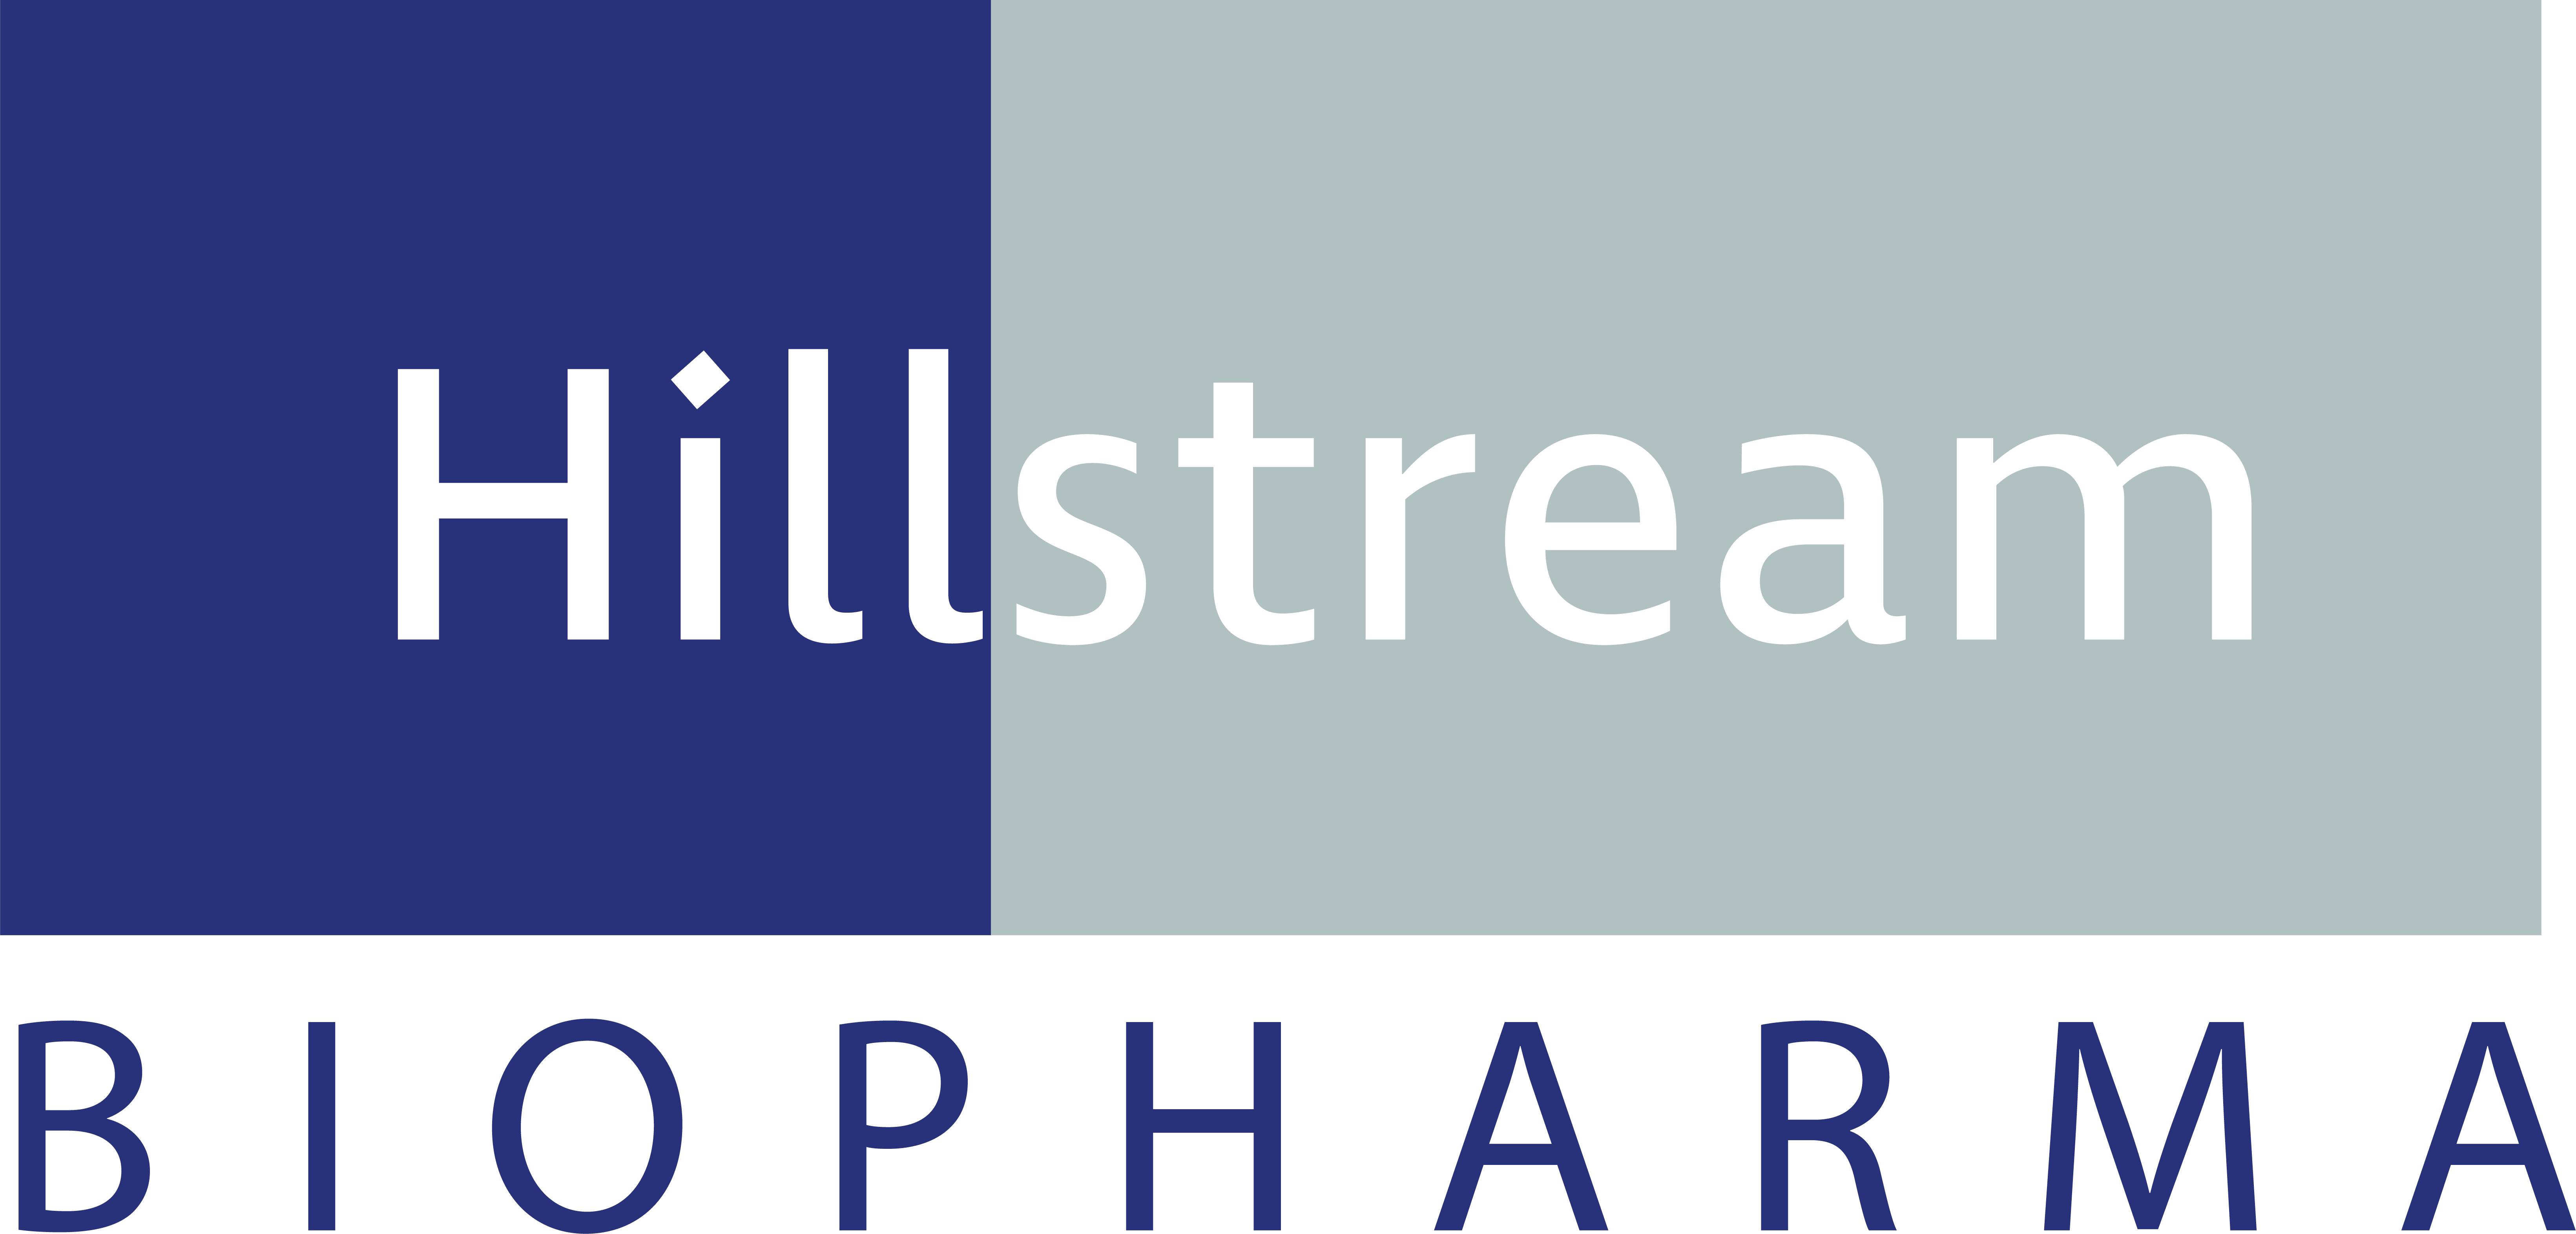 Hillstream BioPharma Licenses Technology to Develop Proprietary HER2 and HER3 Antibody Drug Conjugates against Drug-Resistant Breast, Lung, Gastric, and Ovarian Cancers